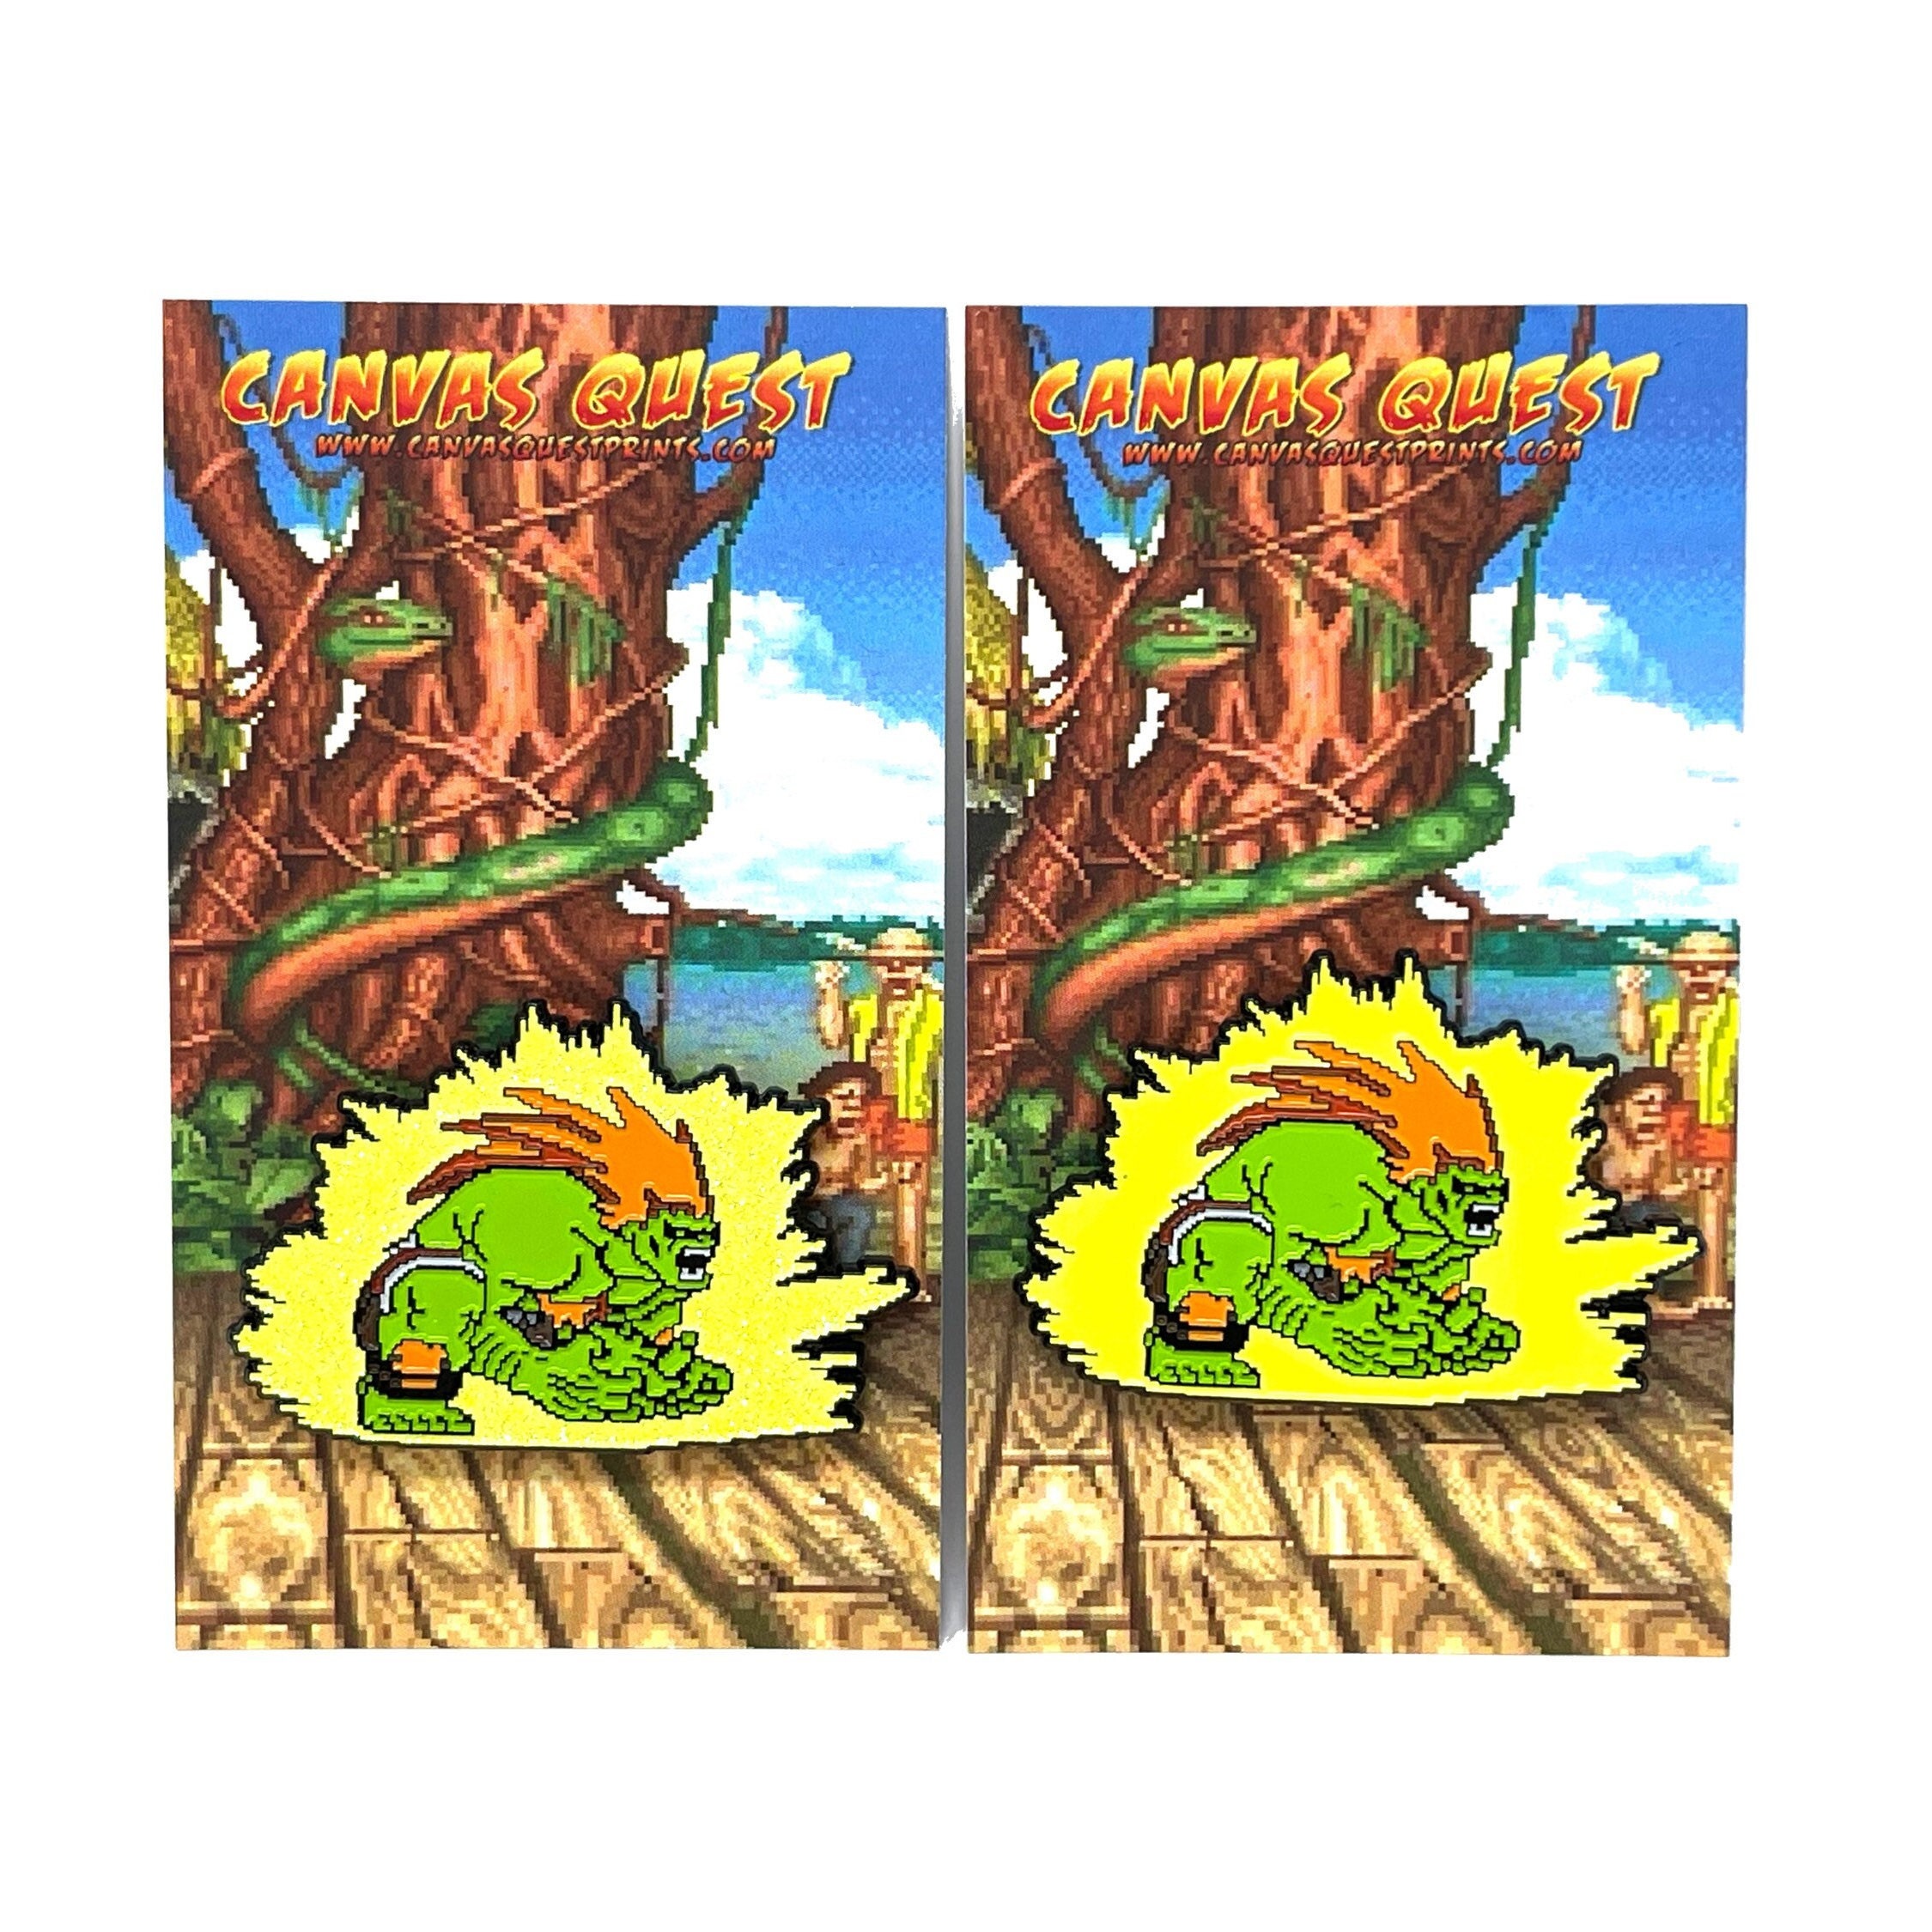 Street Fighter - Blanka – Pinfinity - Augmented Reality Collectible Pins